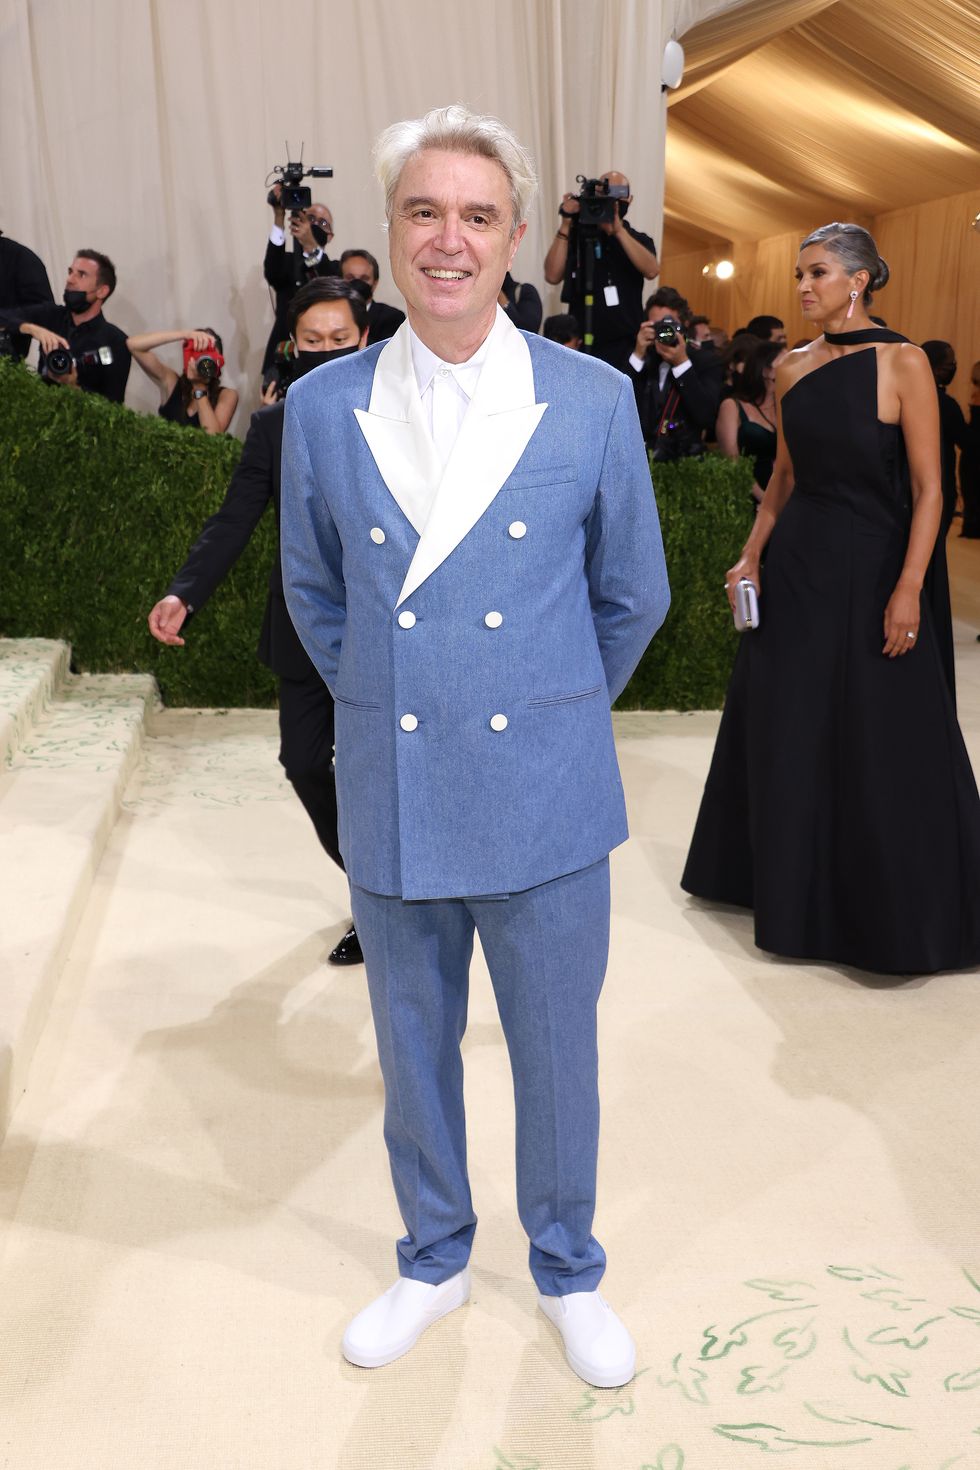 The Met Gala 2021: All The Dresses As They Descend On The Red Carpet